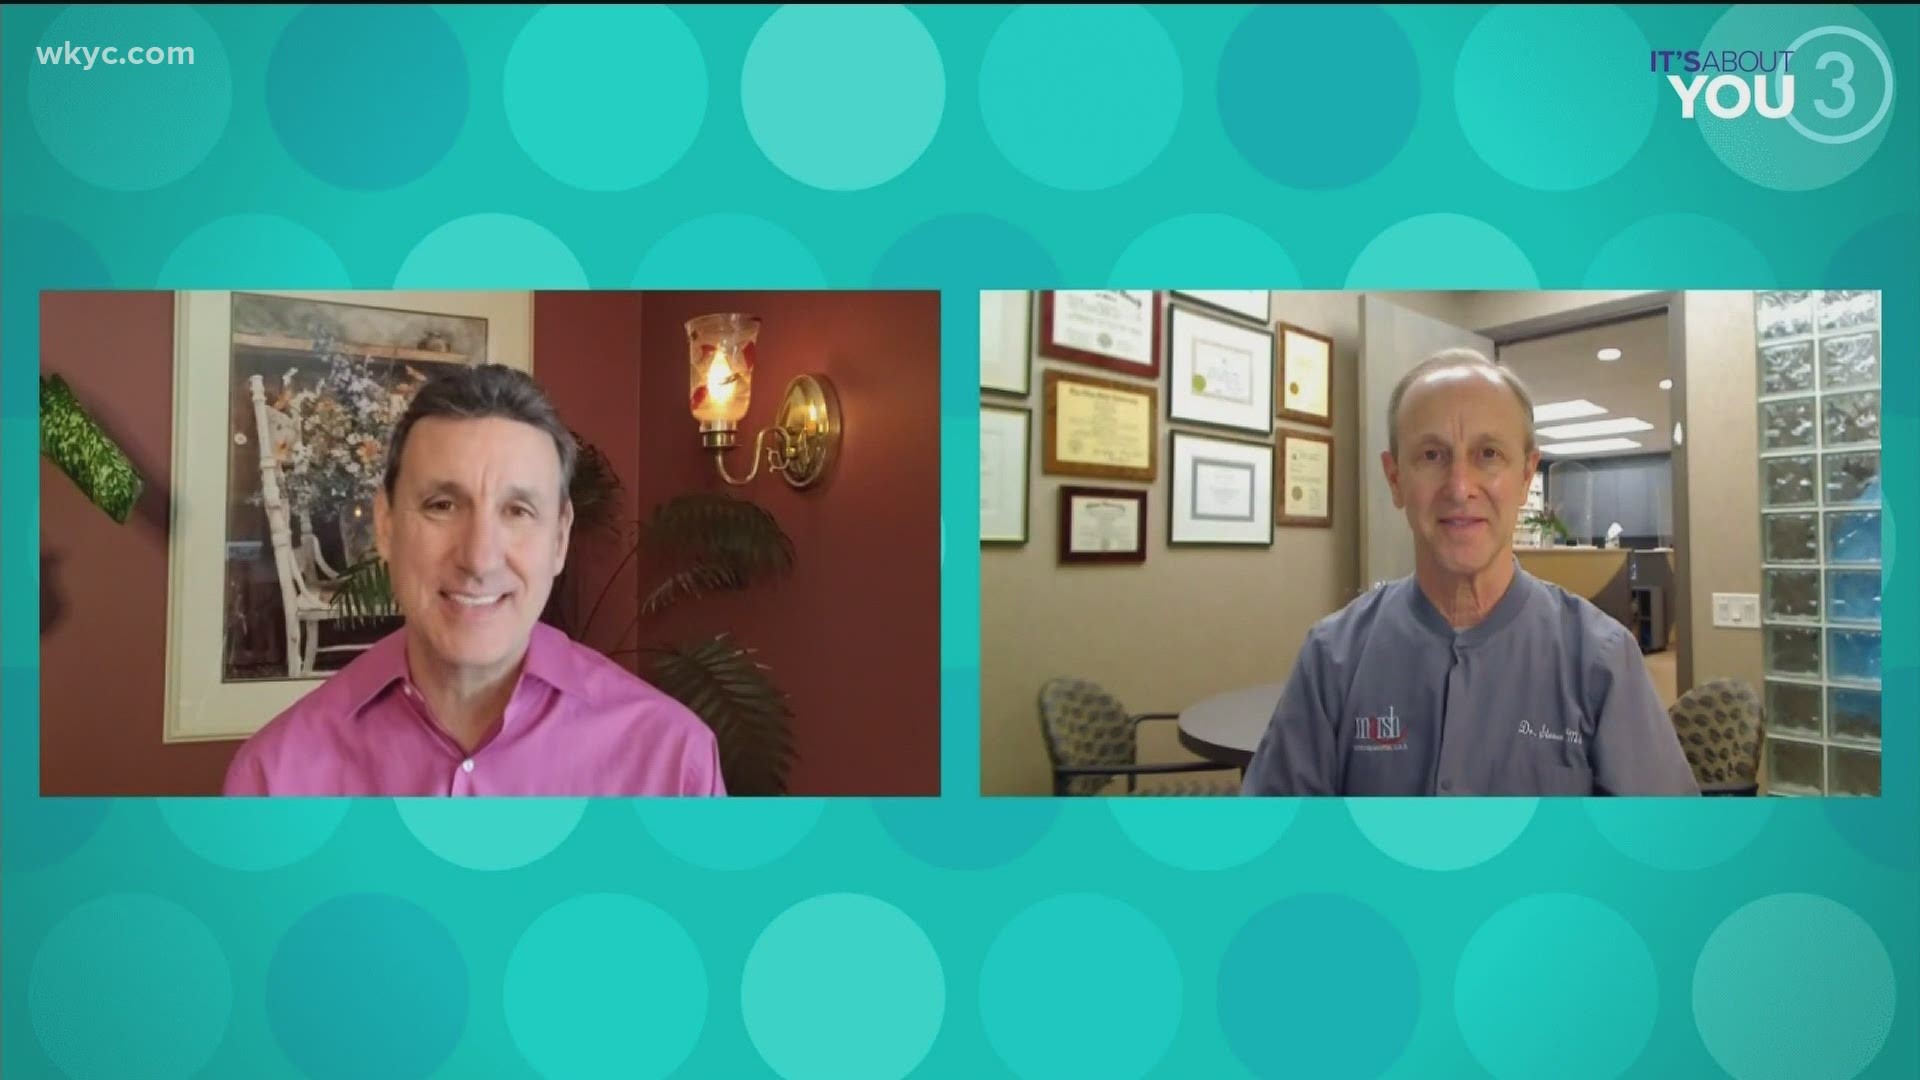 Joe talks with Dr. Steve Marsh about getting a brand new smile for 2021 and takes a look at the incredible before and after photos.